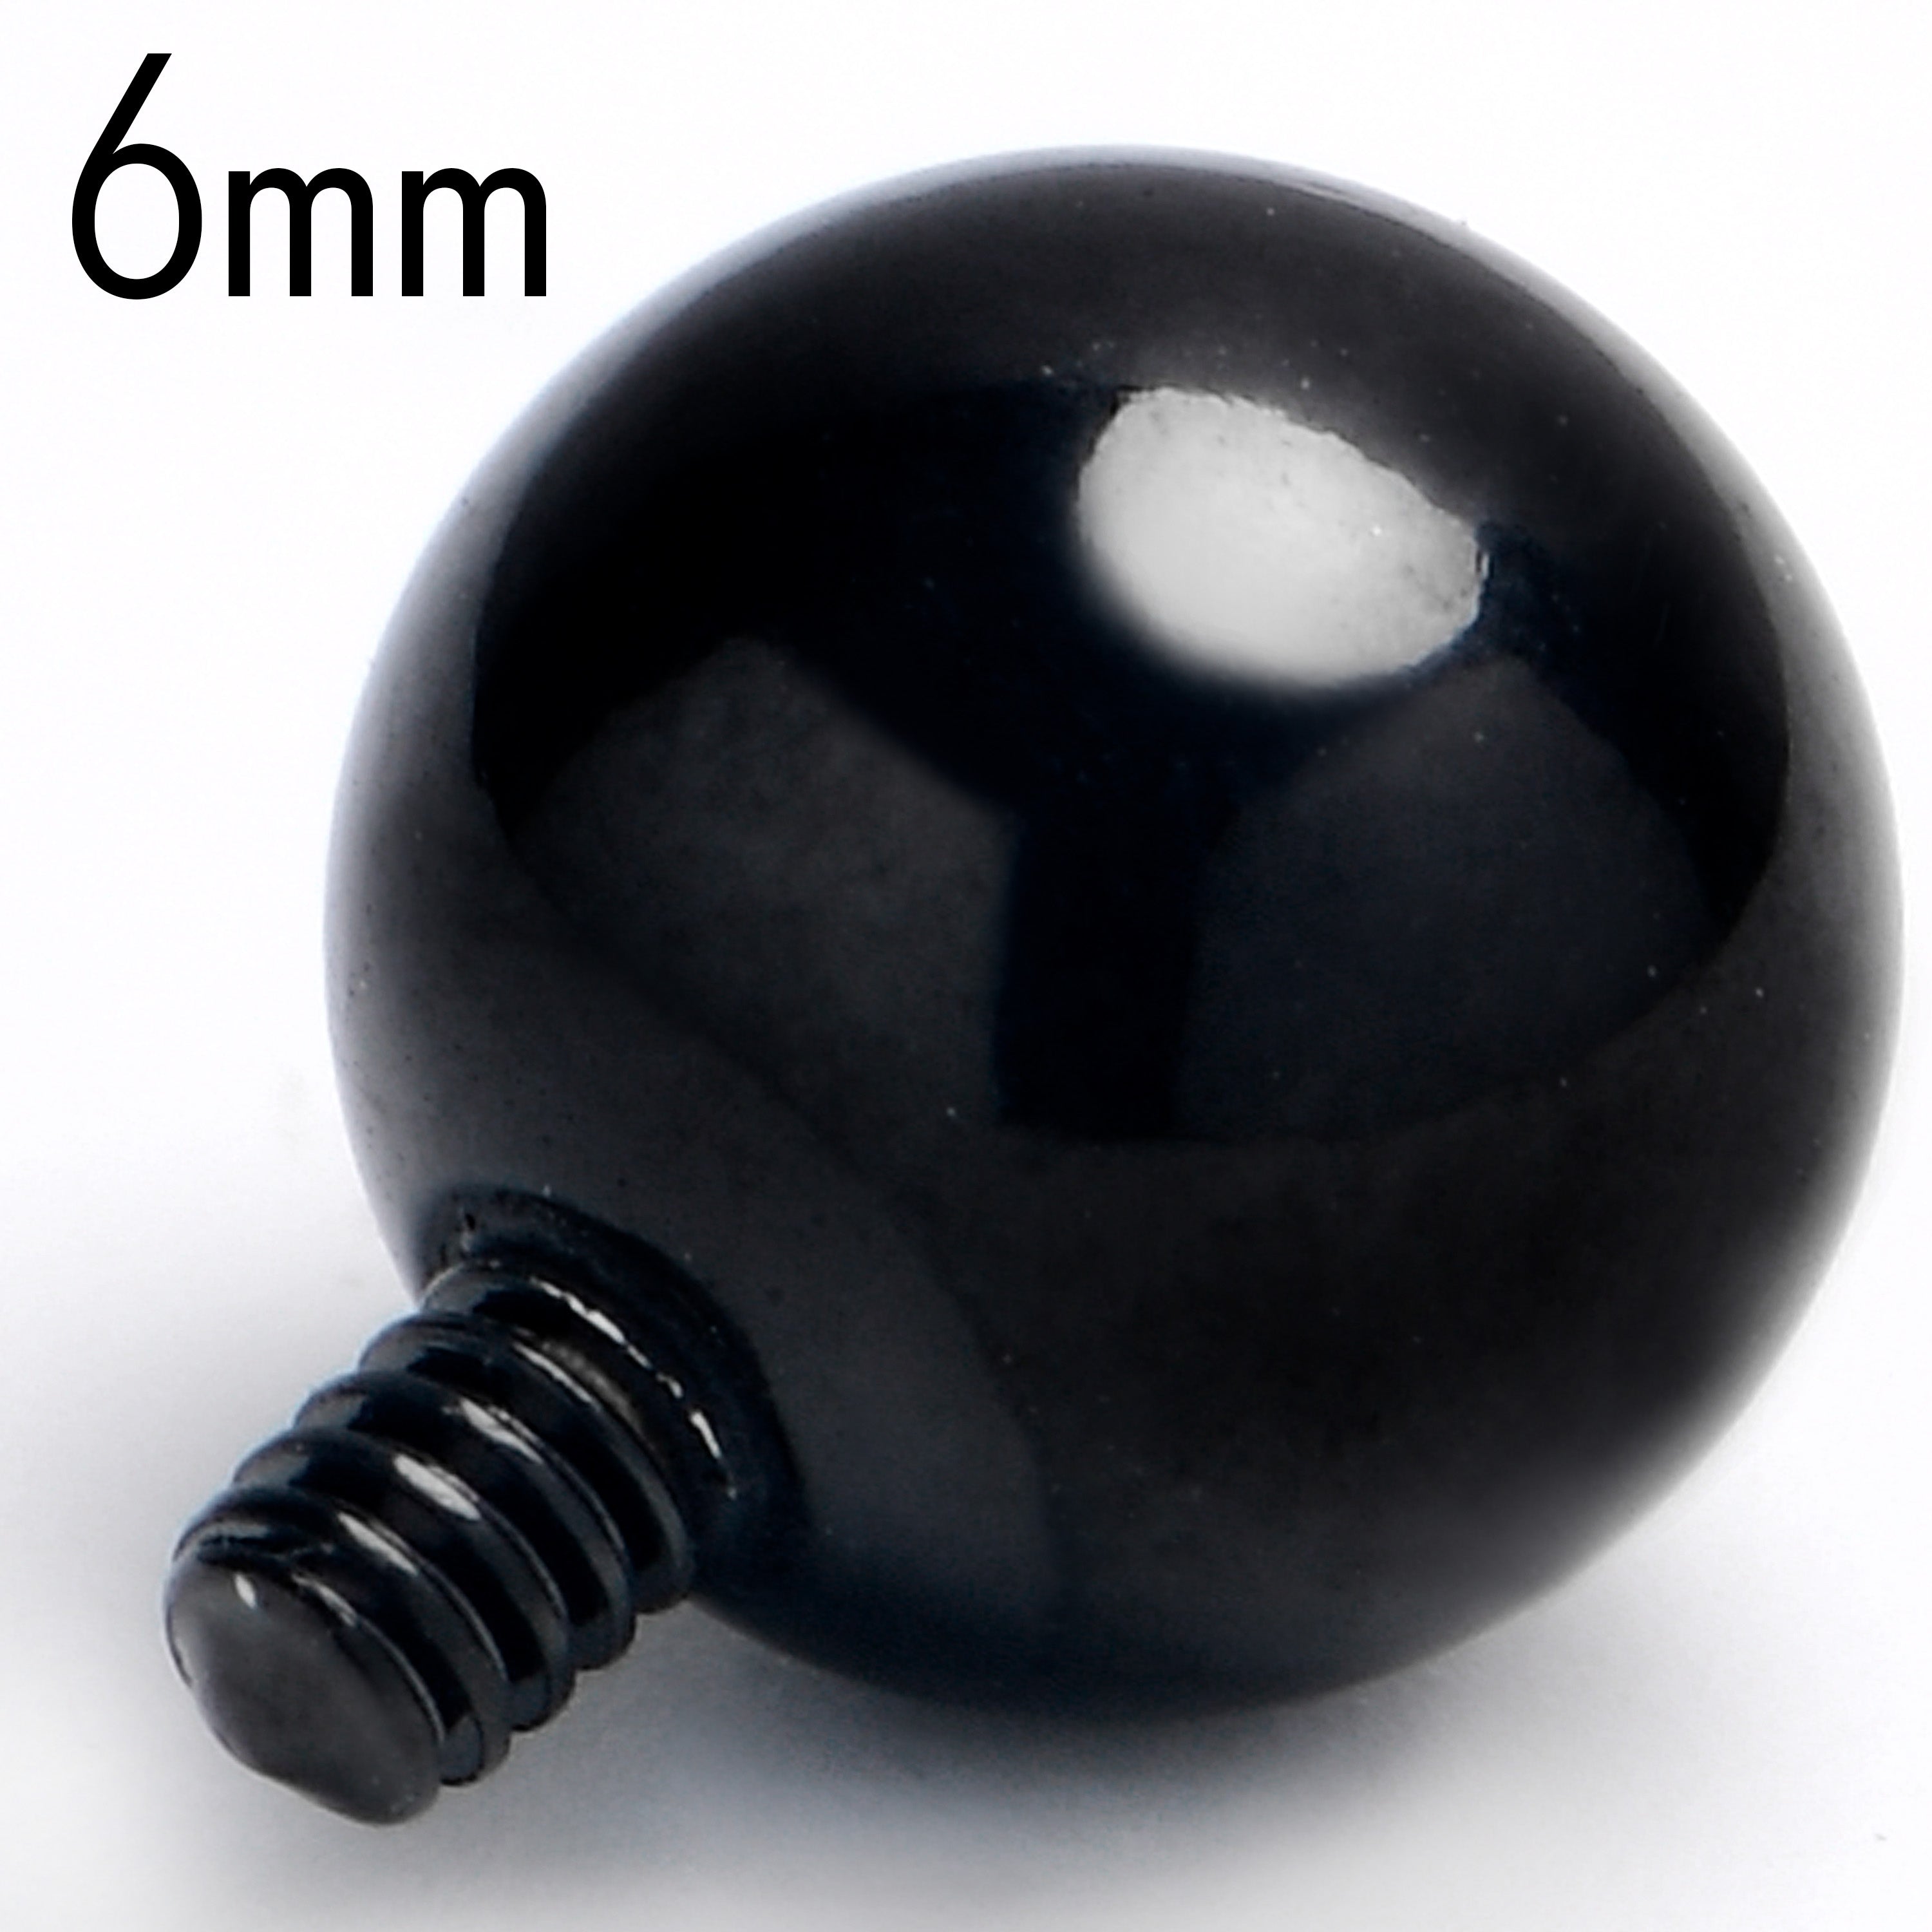 14 Gauge 6mm Black Replacement Ball End Internally Threaded Jewelry